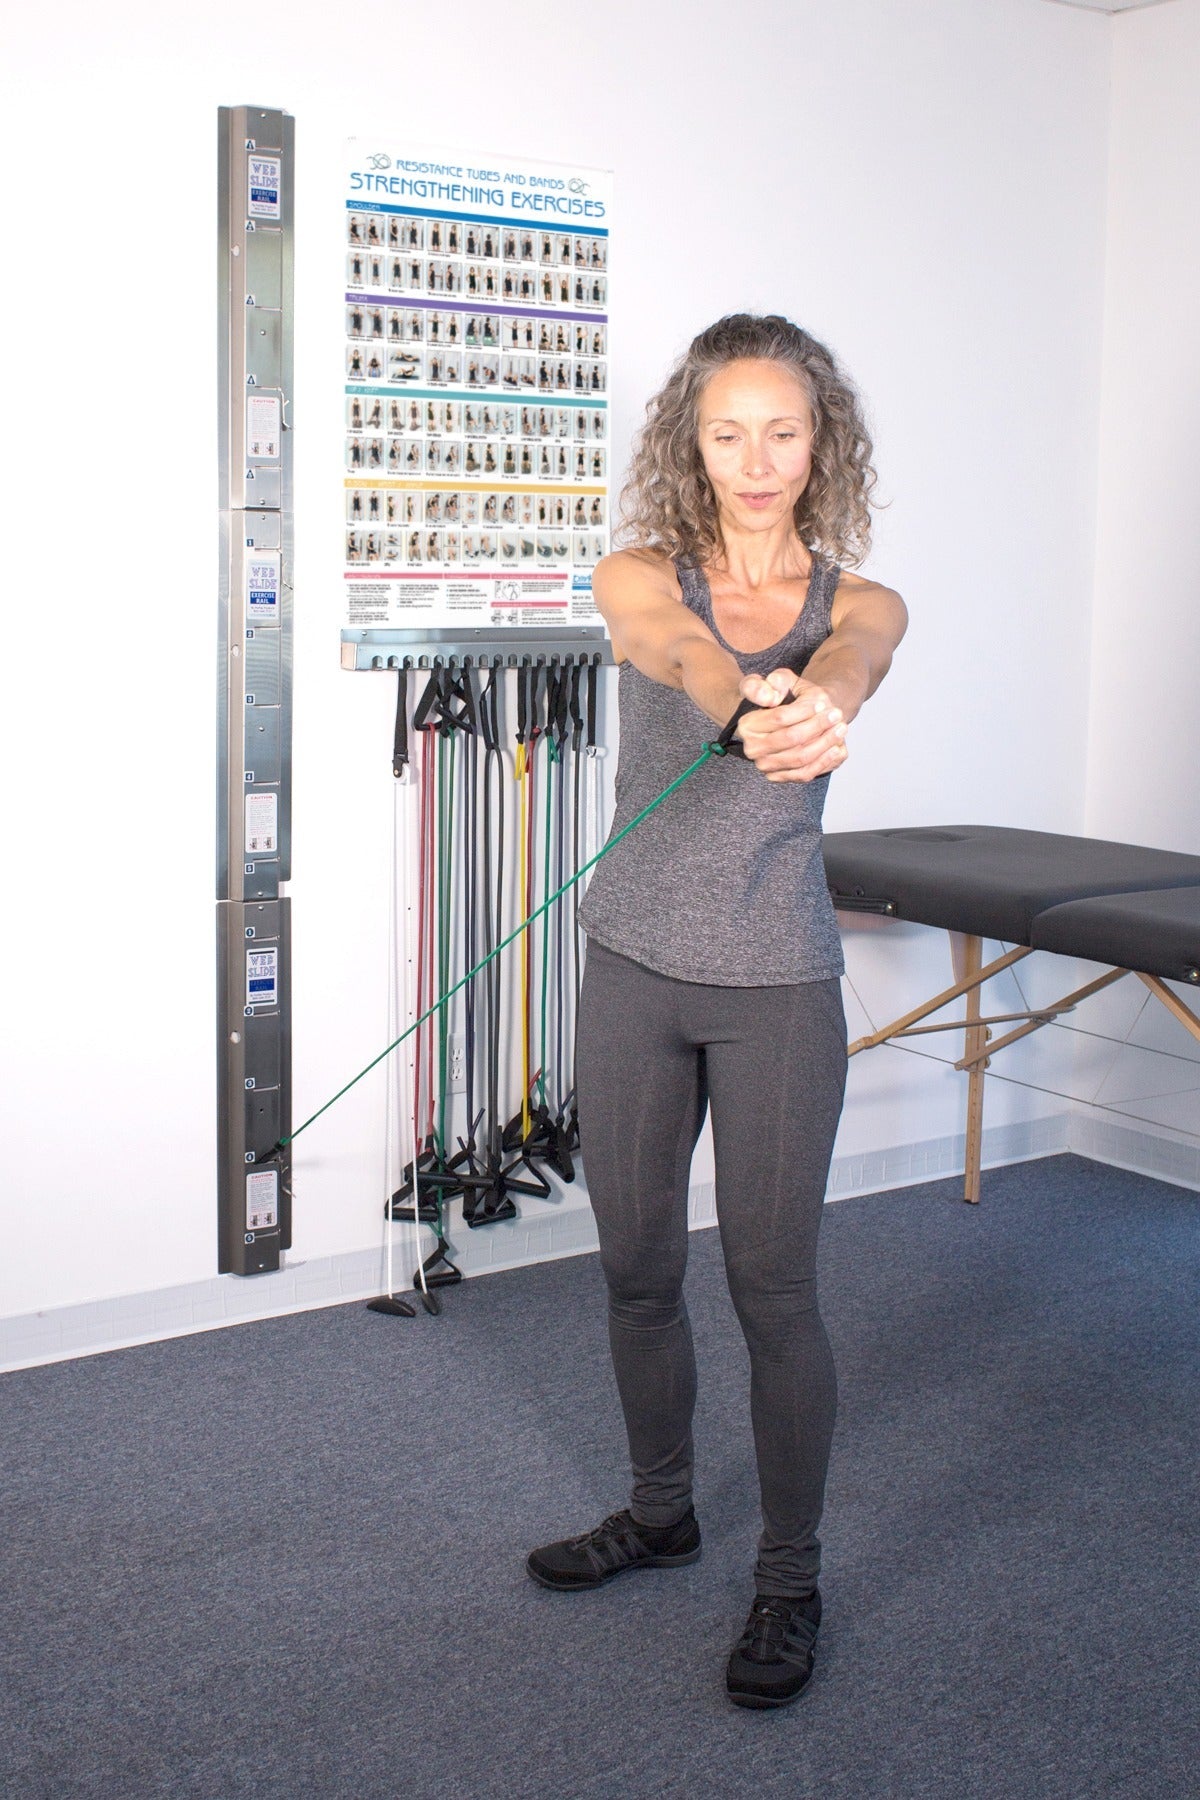 A person using a 3 ft. Unilateral Loop with Handle Heavy Resistance hooked up to a webslide in a training room